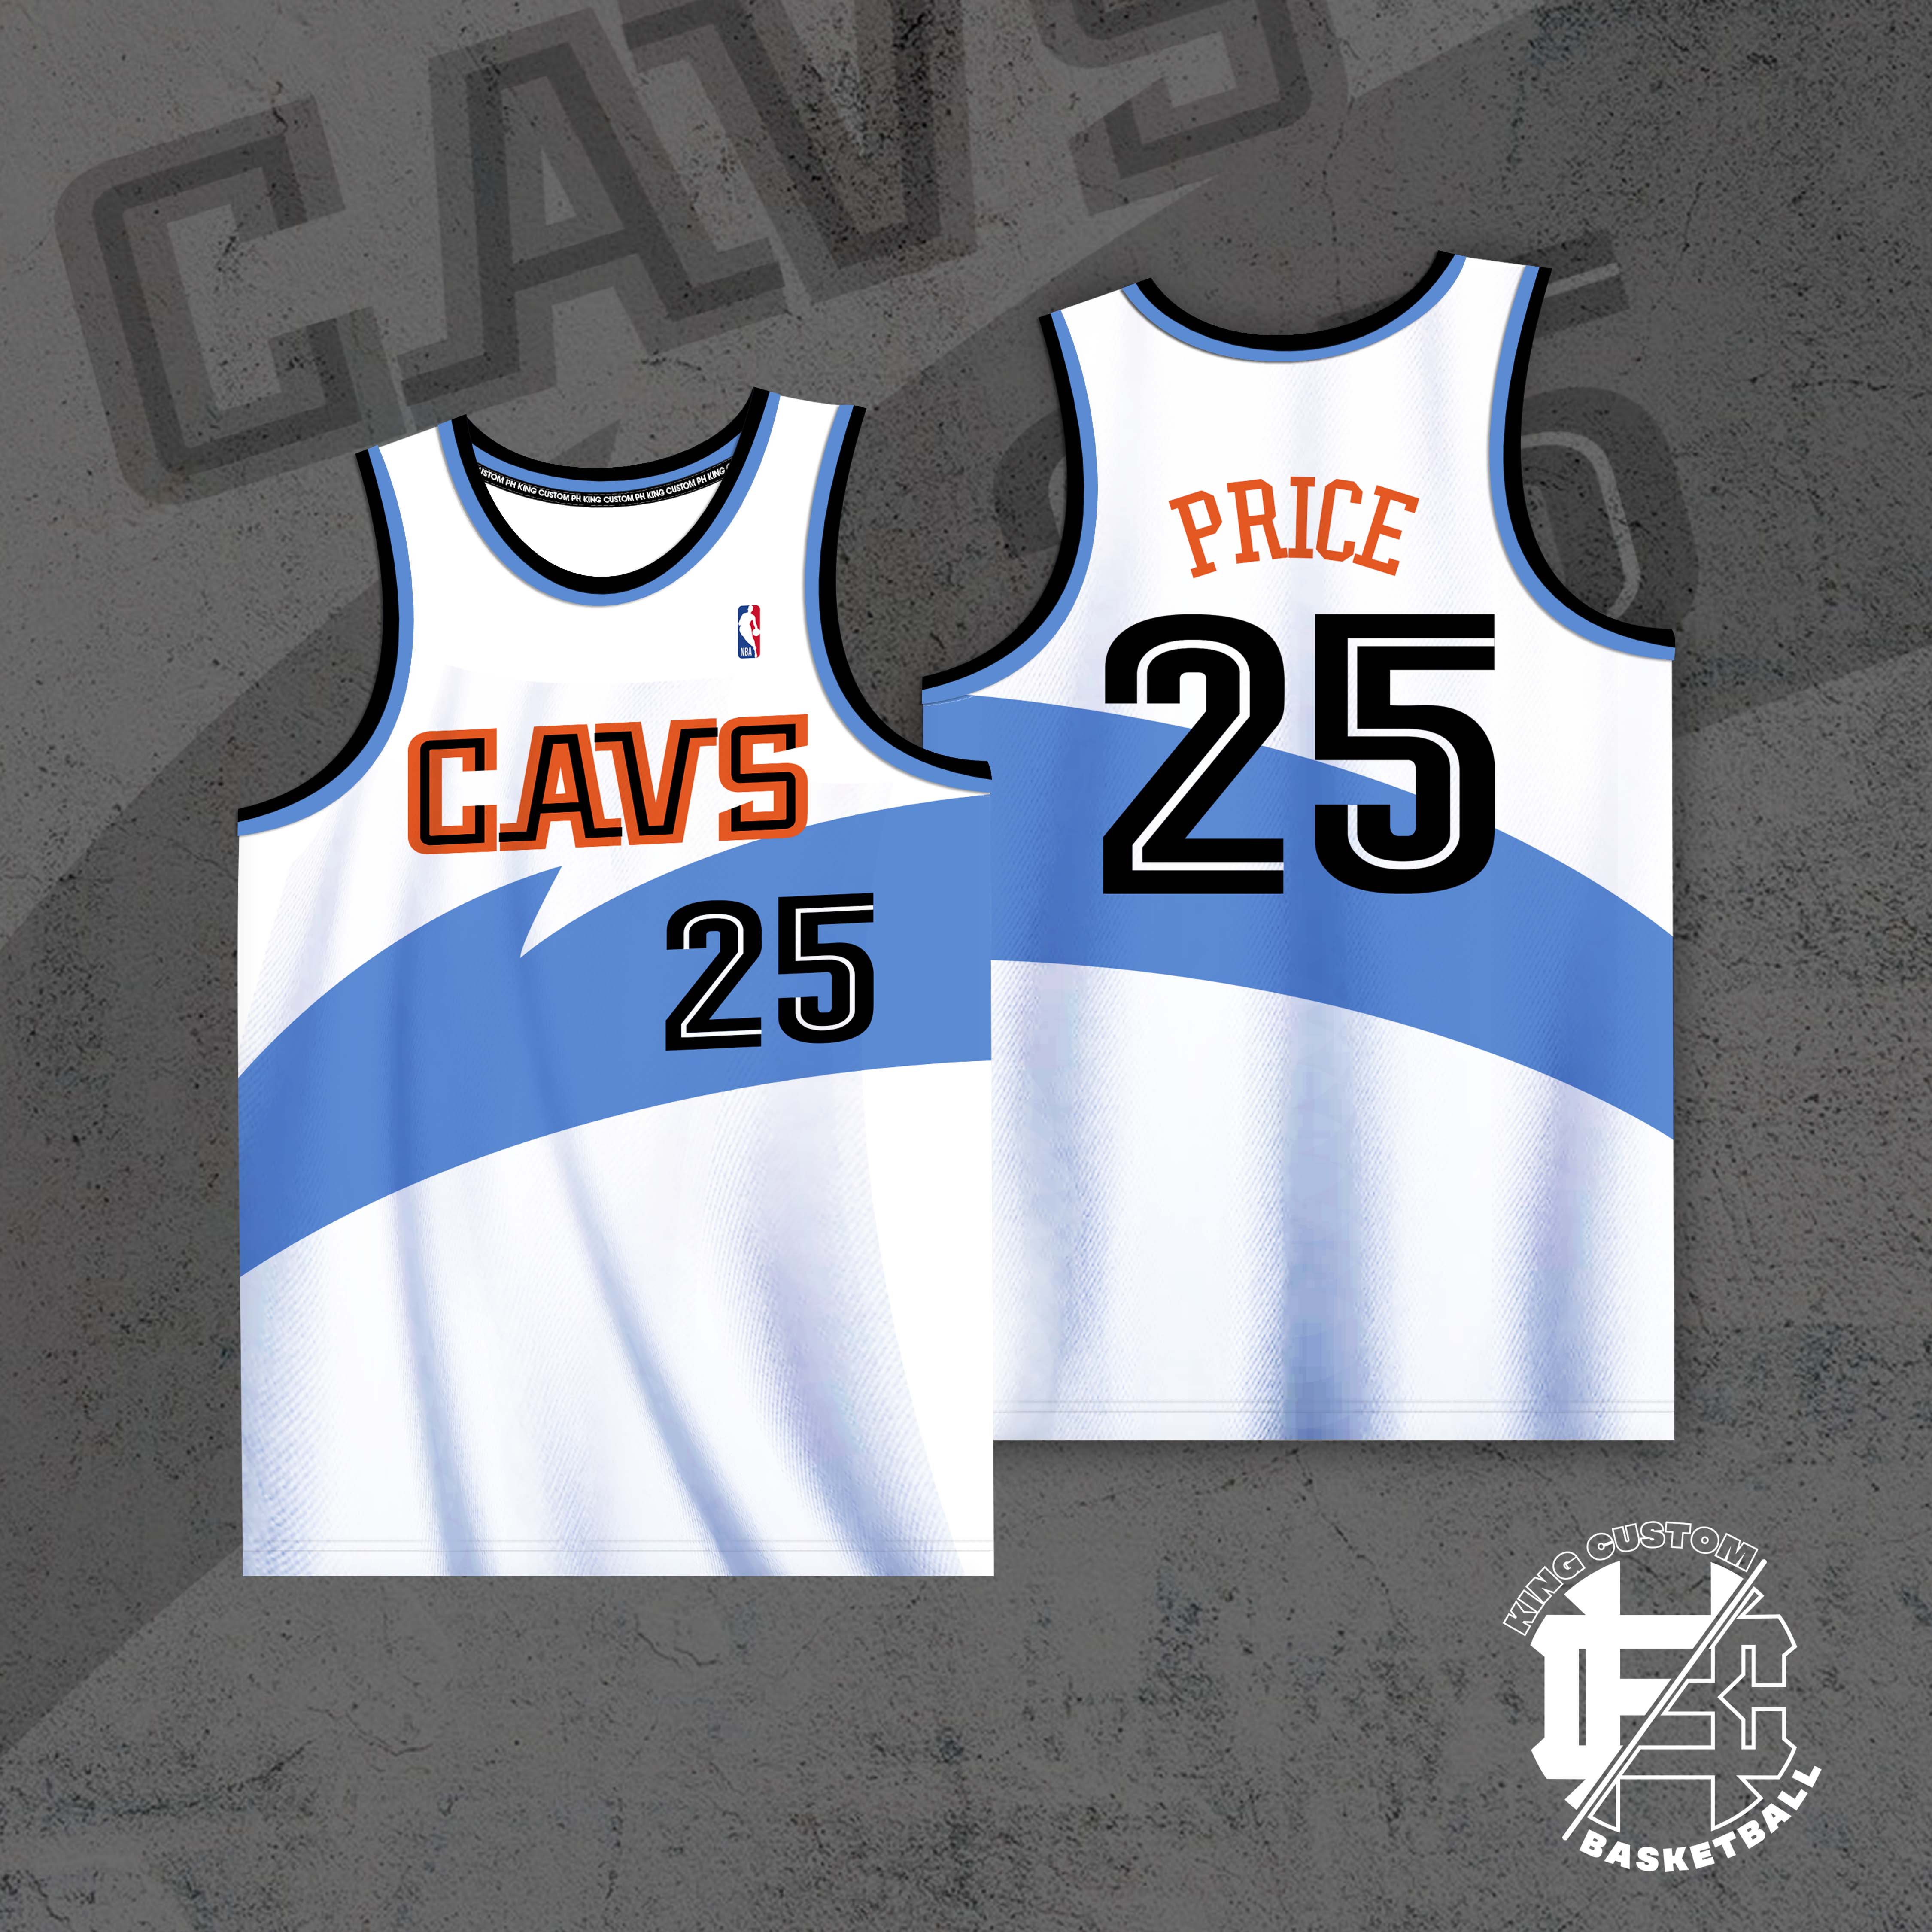 2020 Cleveland Cavaliers Abstract Series Full Sublimated Basketball Jersey